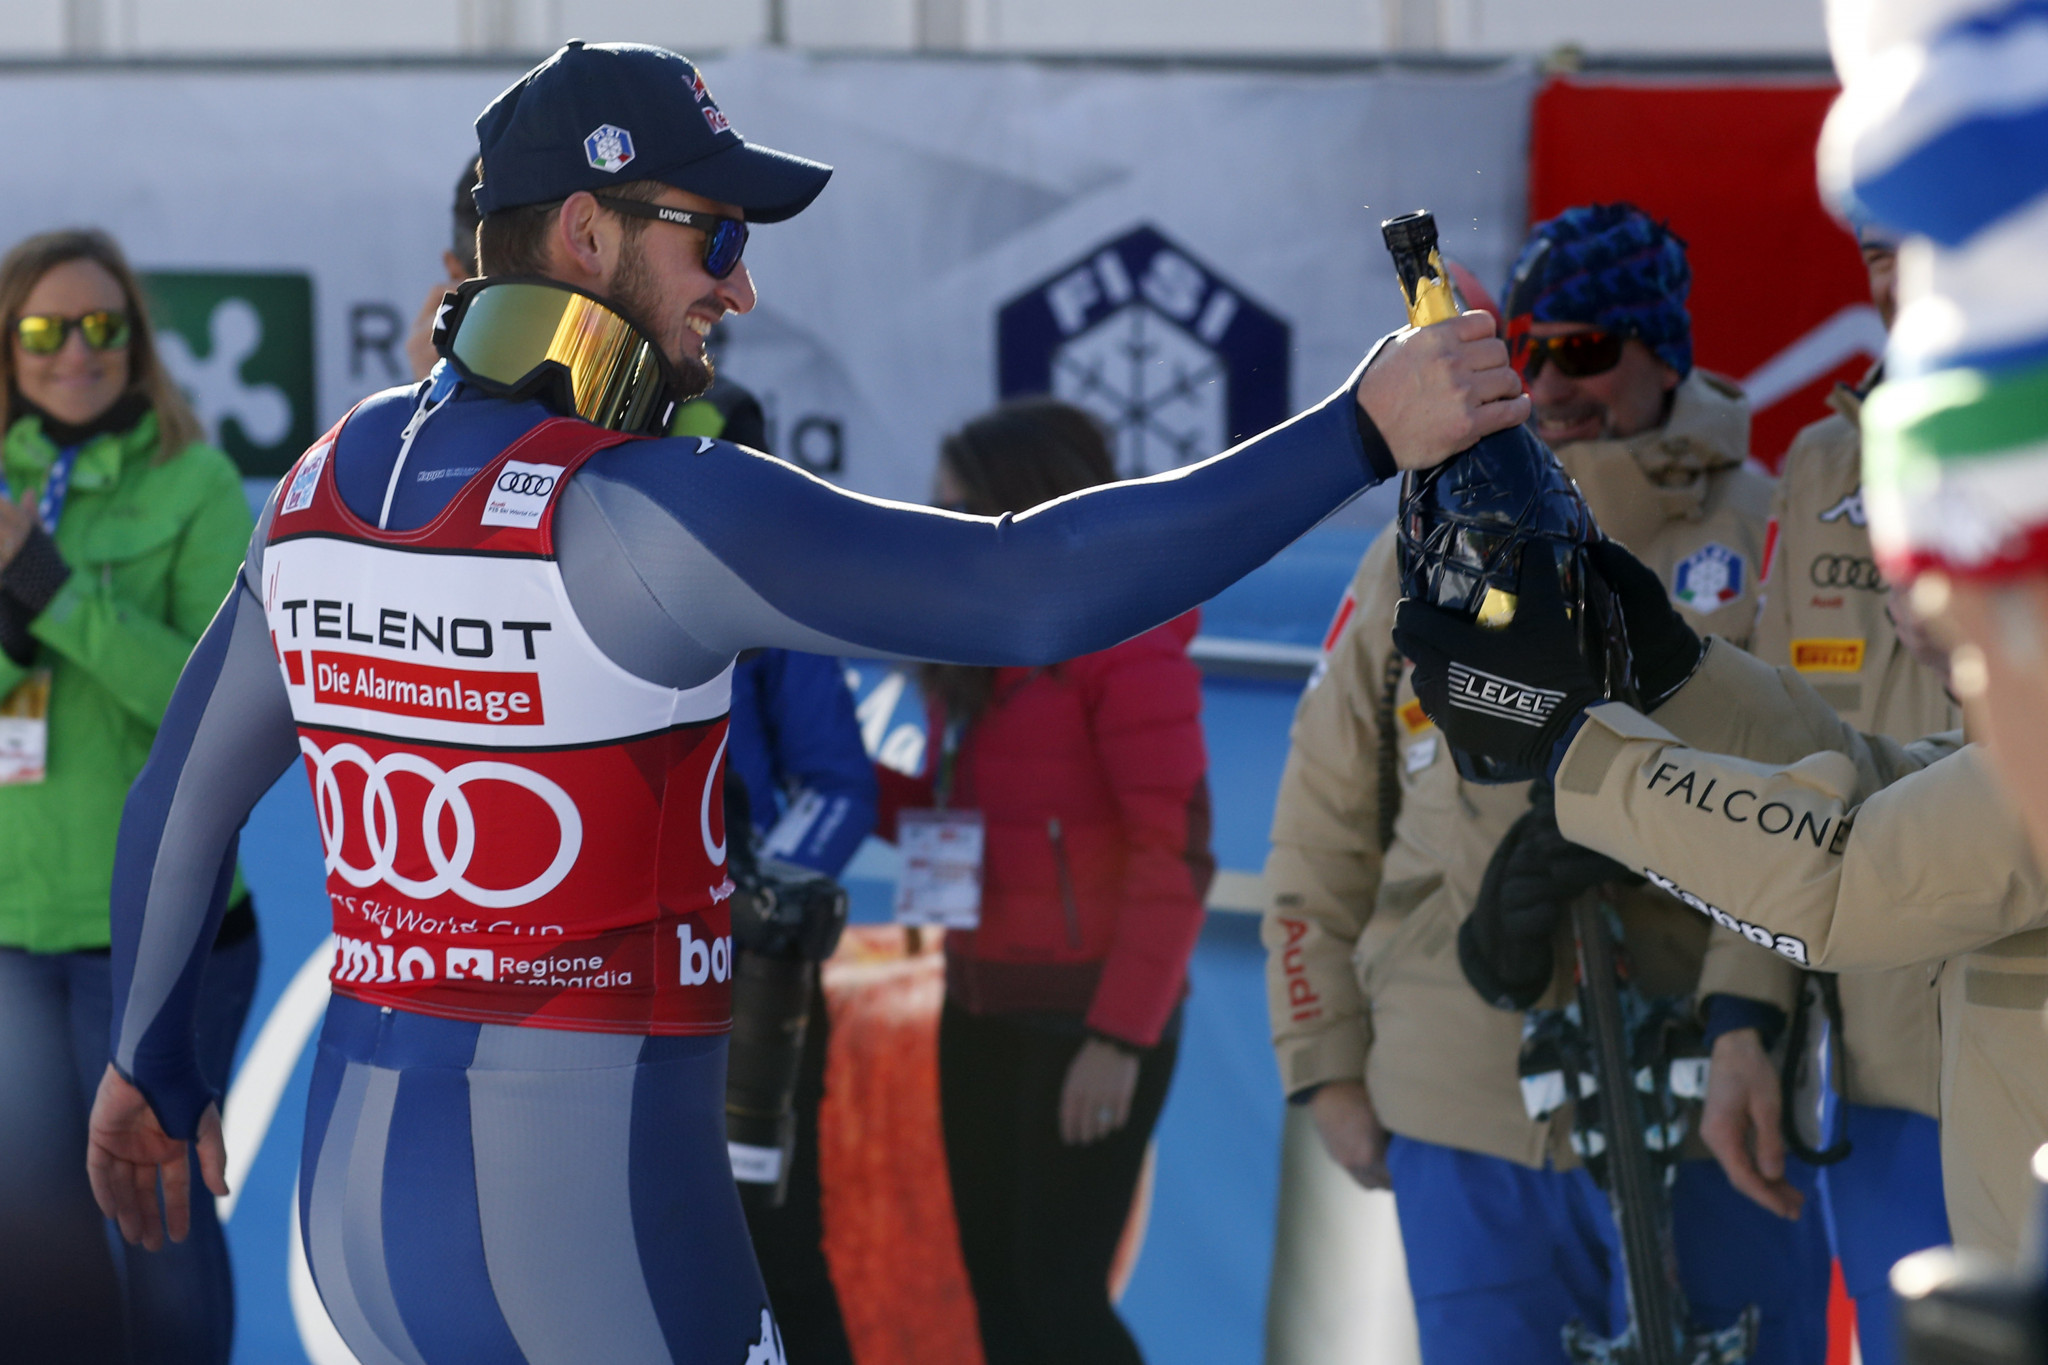 Paris secures second straight downhill win at FIS Alpine Skiing World Cup